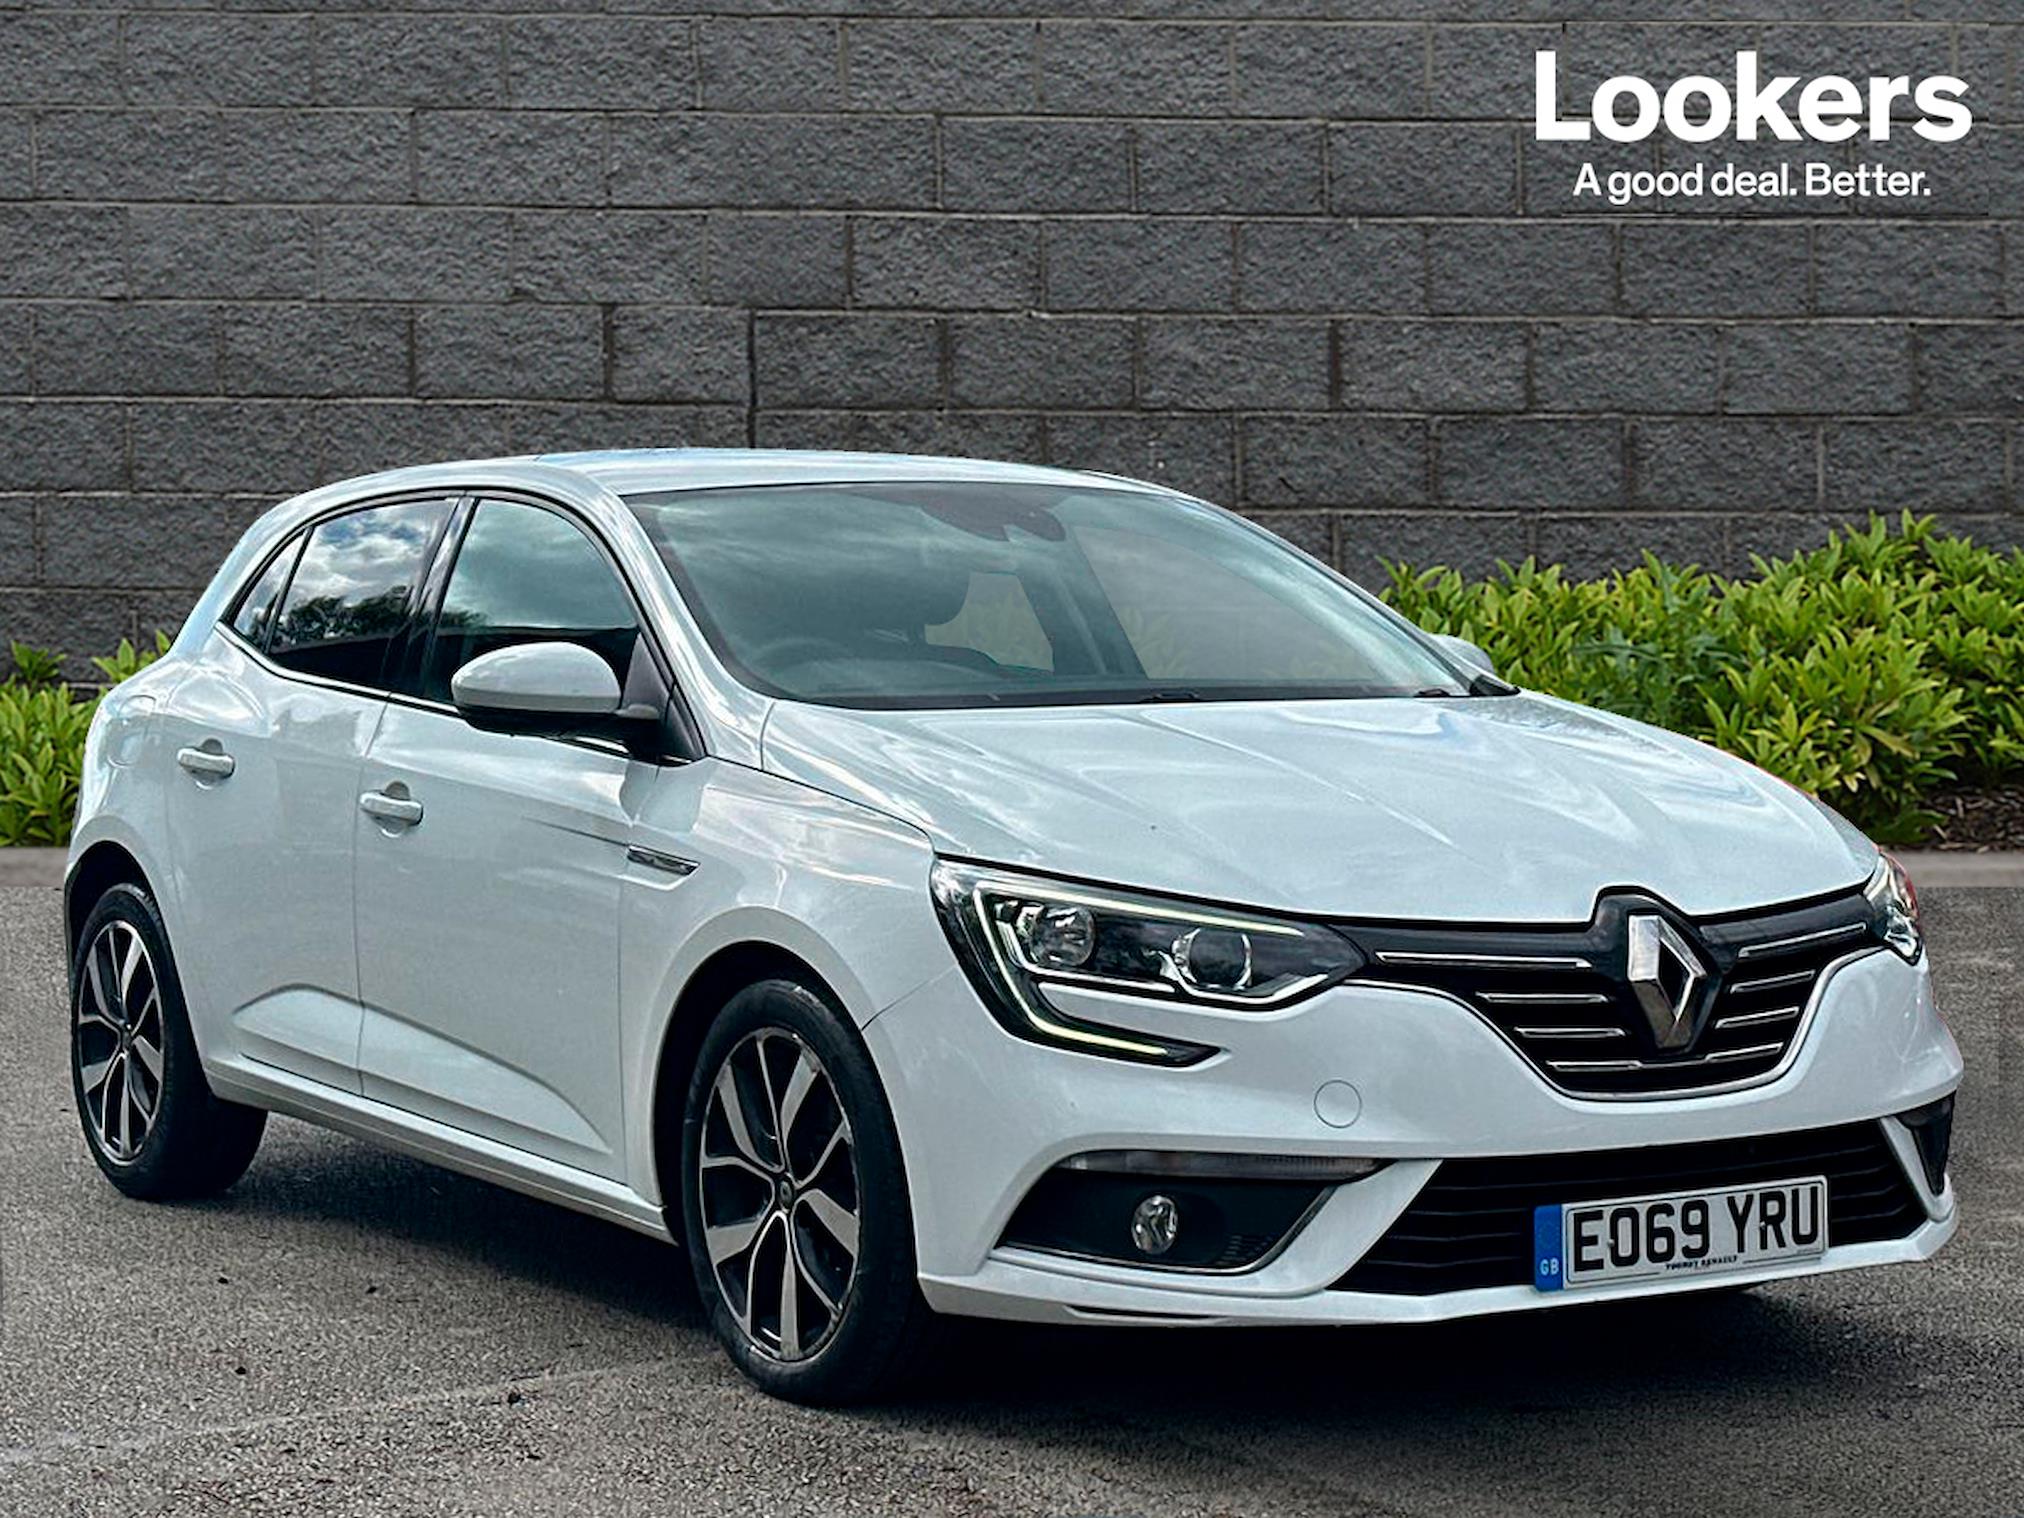 Used RENAULT MEGANE 1.5 Blue Dci 115 Iconic 5Dr 2019